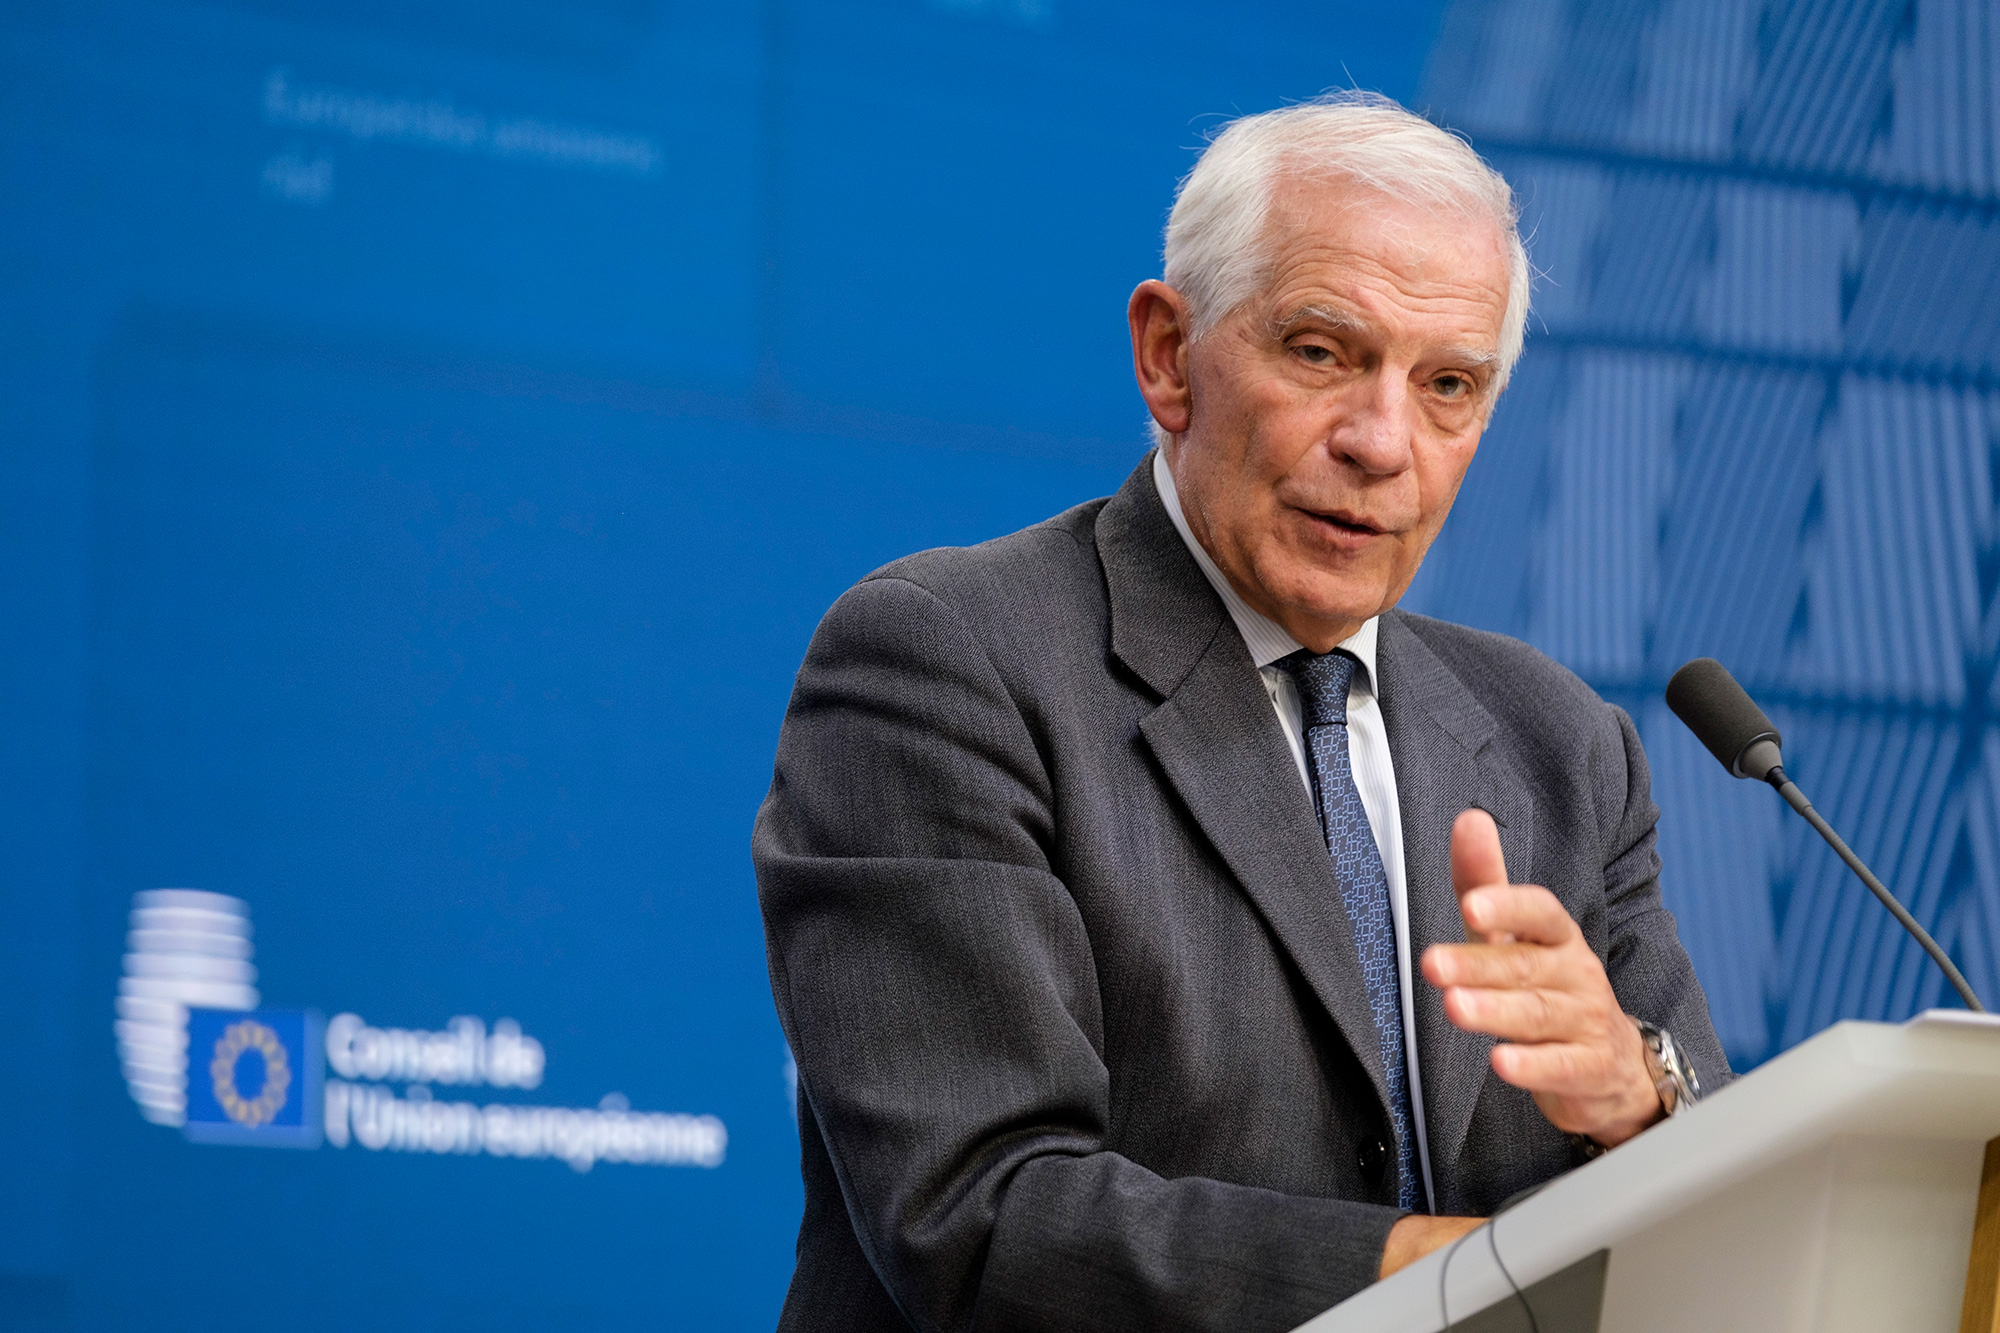 EU Commissioner for Foreign Affairs and Security Policy Vice President Josep Borrell speaks to media at the EU Council headquarters in Brussels, Belgium, on November 14.